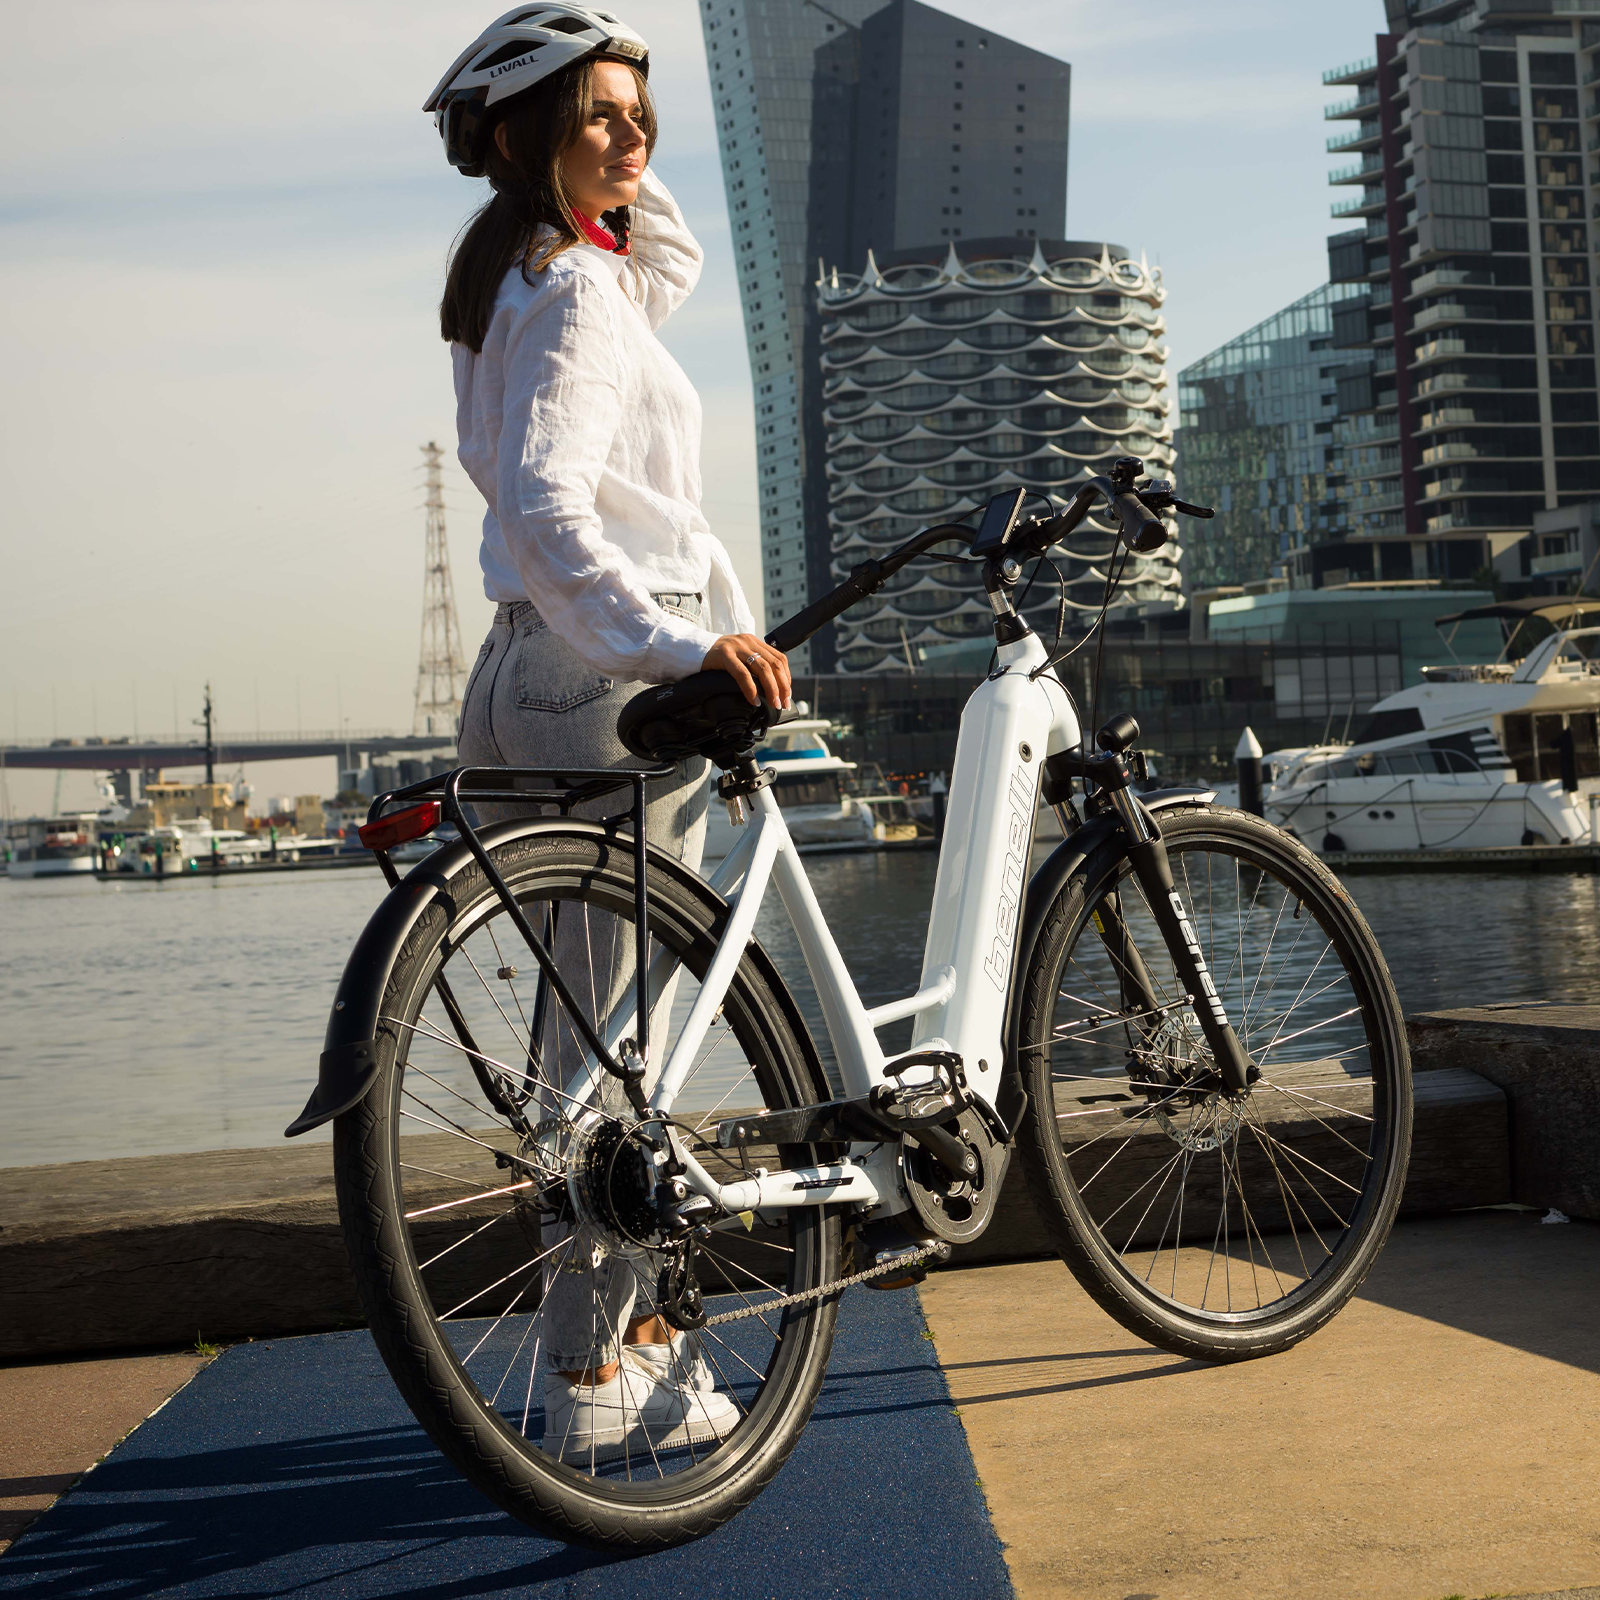 Refurbished Benelli ebike Prego (Only available Sydney area, self pick-up only）